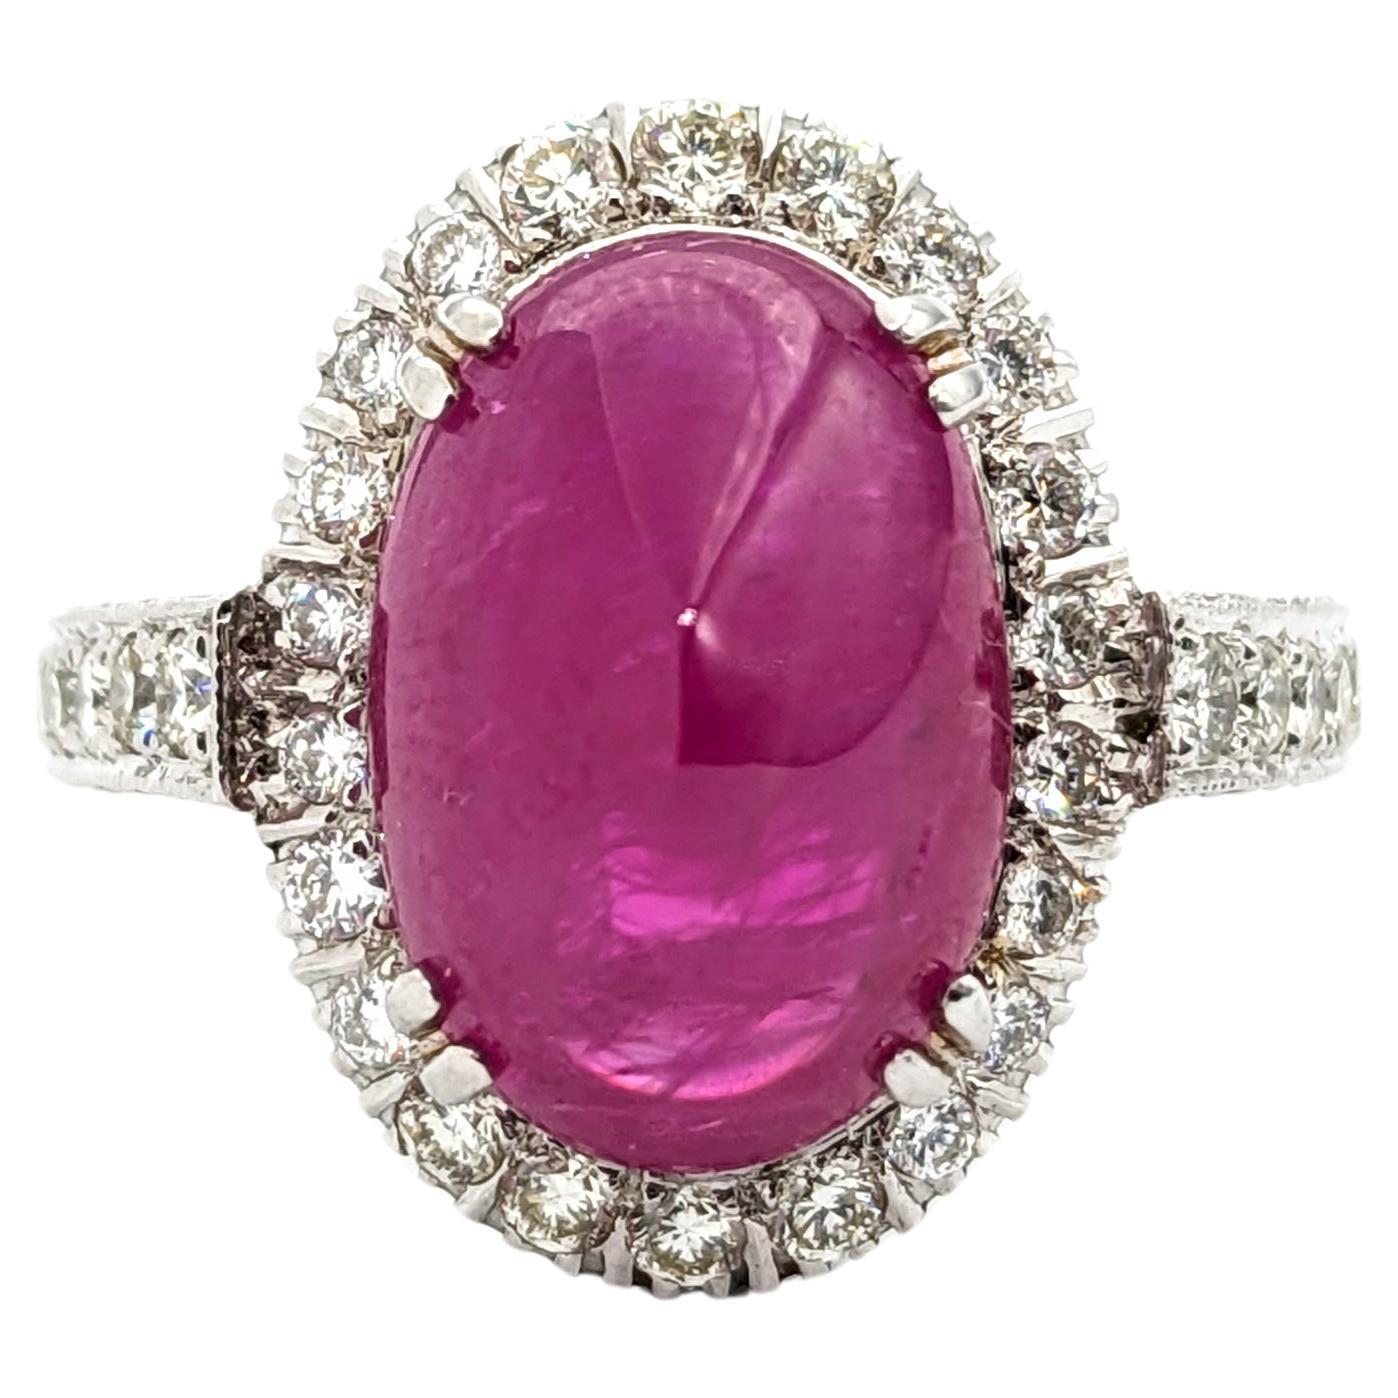 Stunning Natural Ruby Cabochon Ring with Round Diamonds in 18Kt White Gold